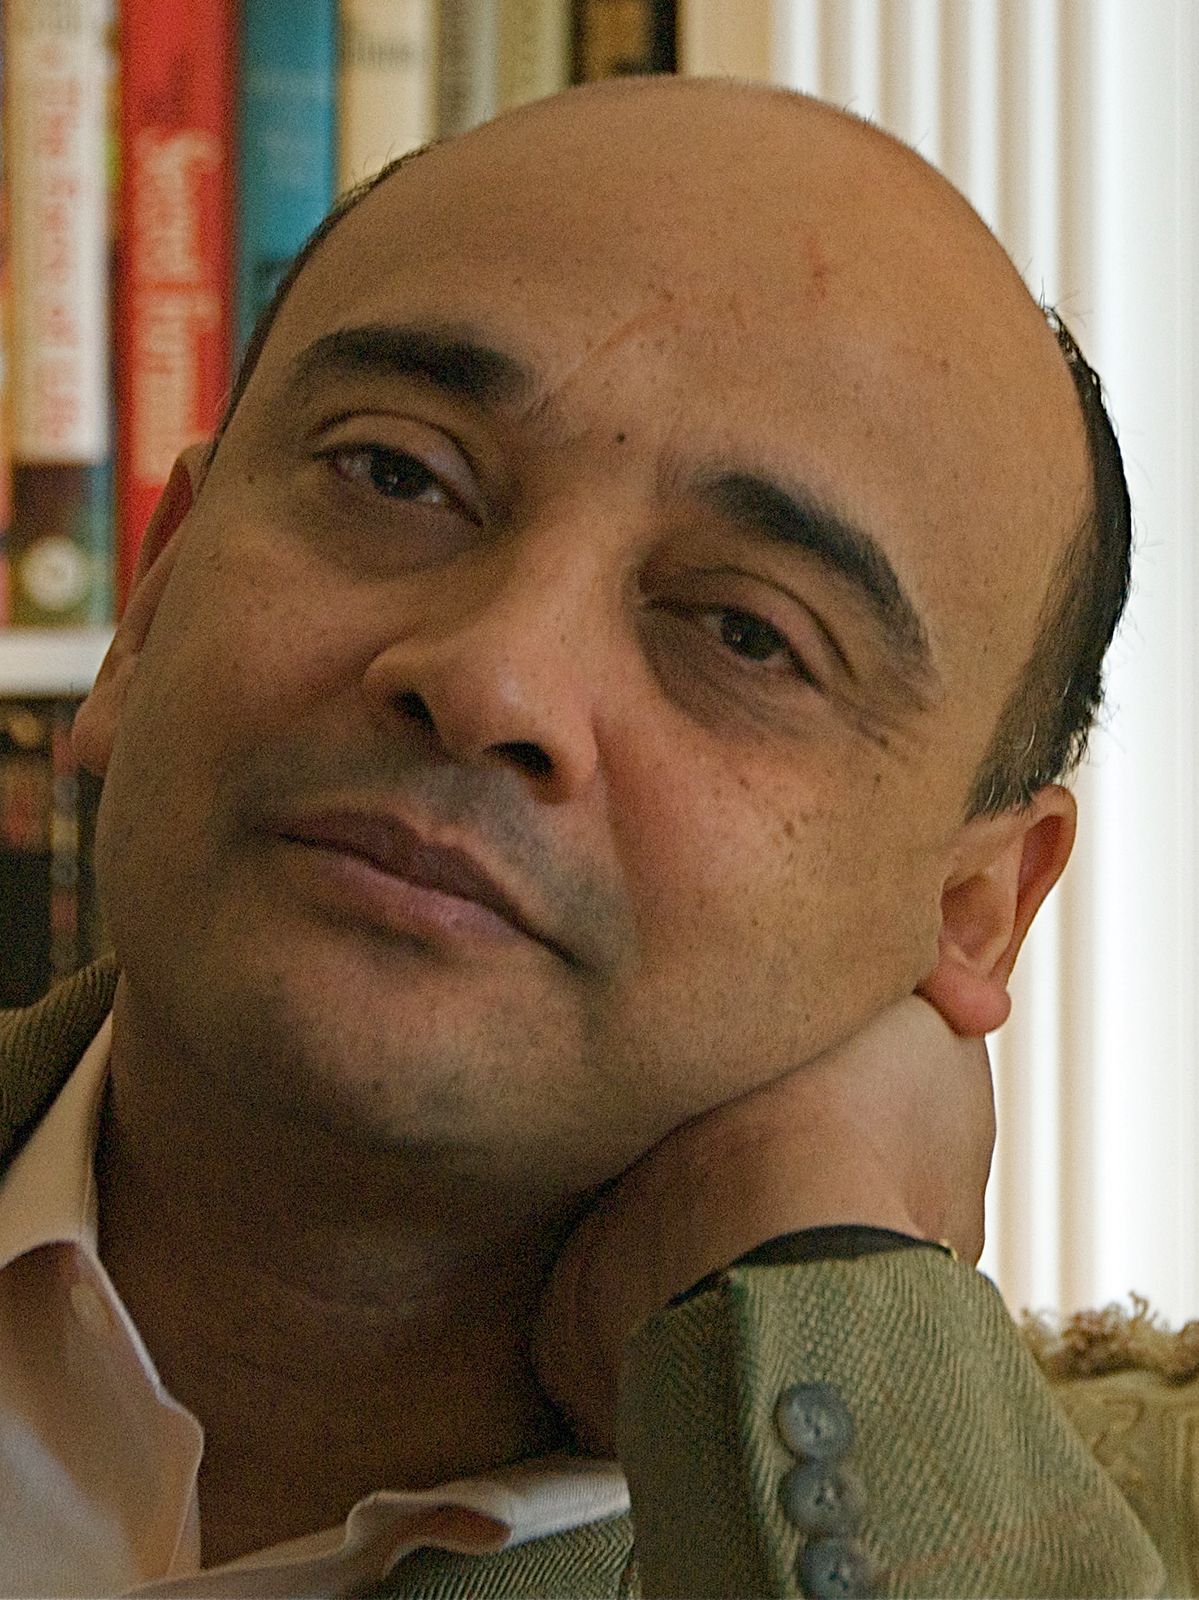 Dr. Kwame Anthony Appiah Phillospher, NYU Department of Philosophy